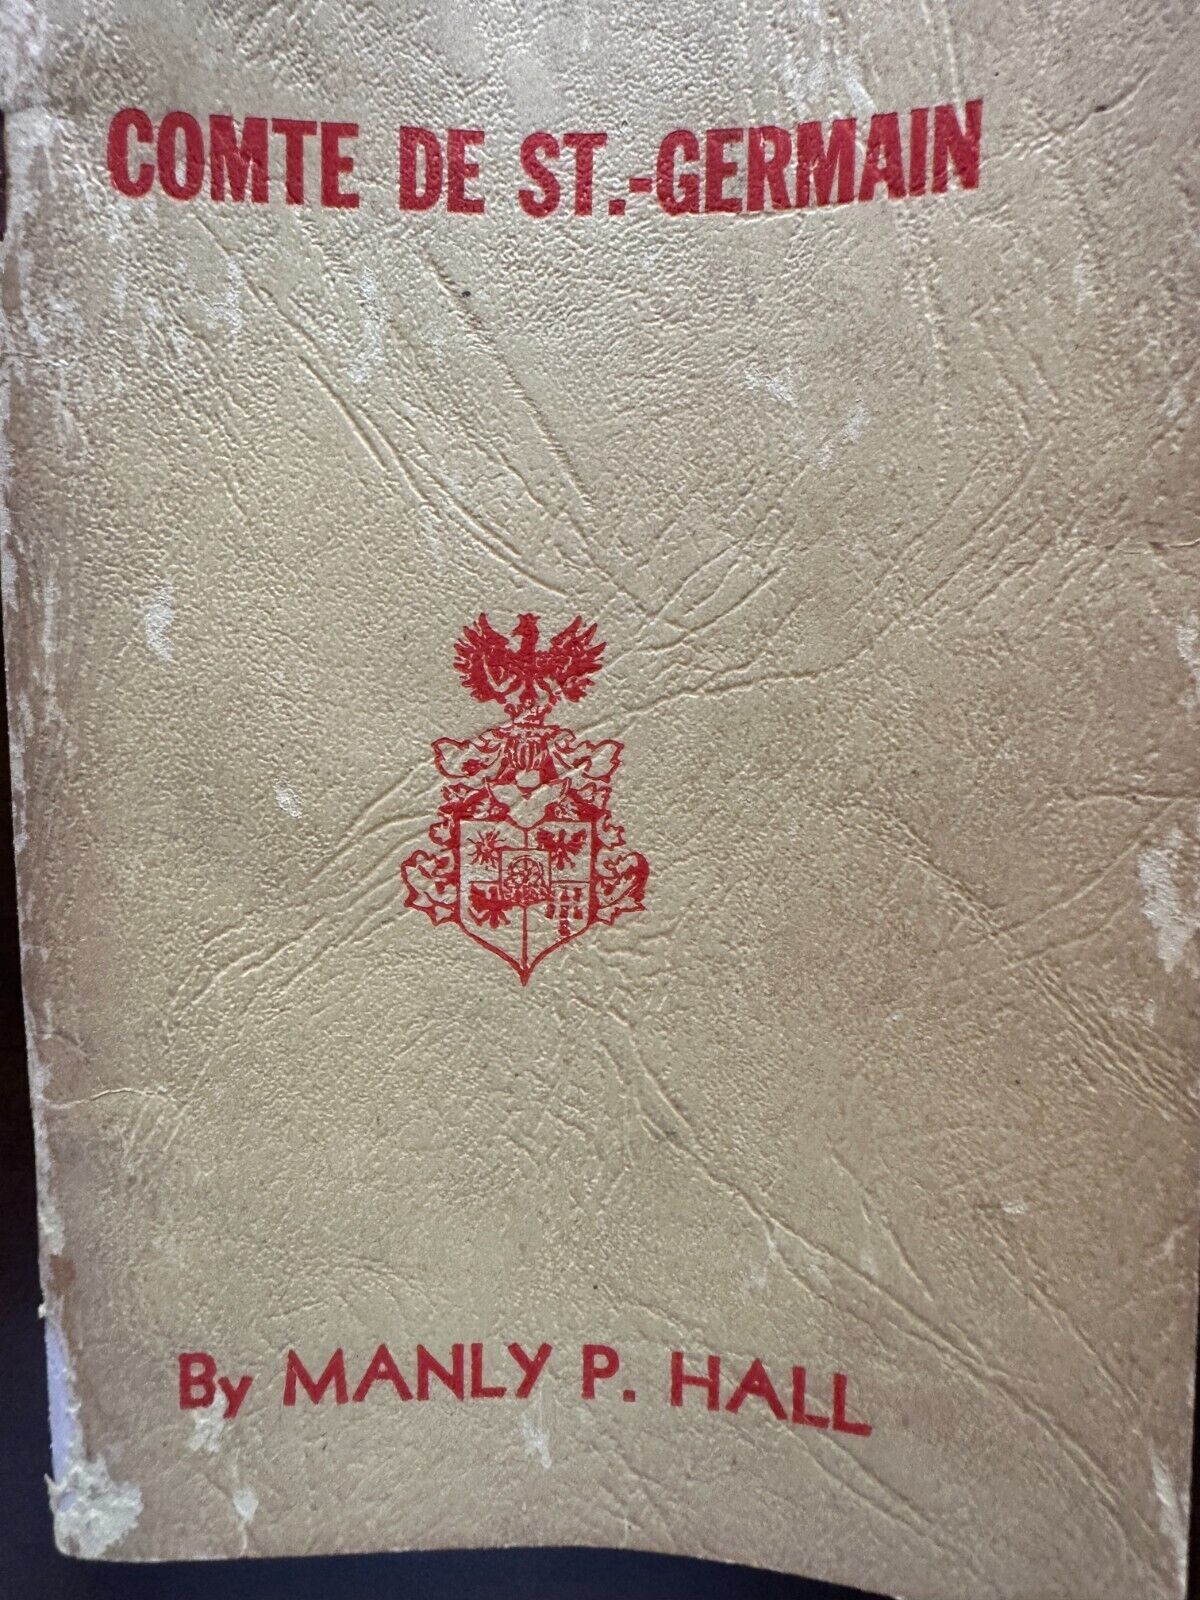 Comte de St.-Germain by Manly P. Hall 1946 Philosophical Res Society VERY RARE